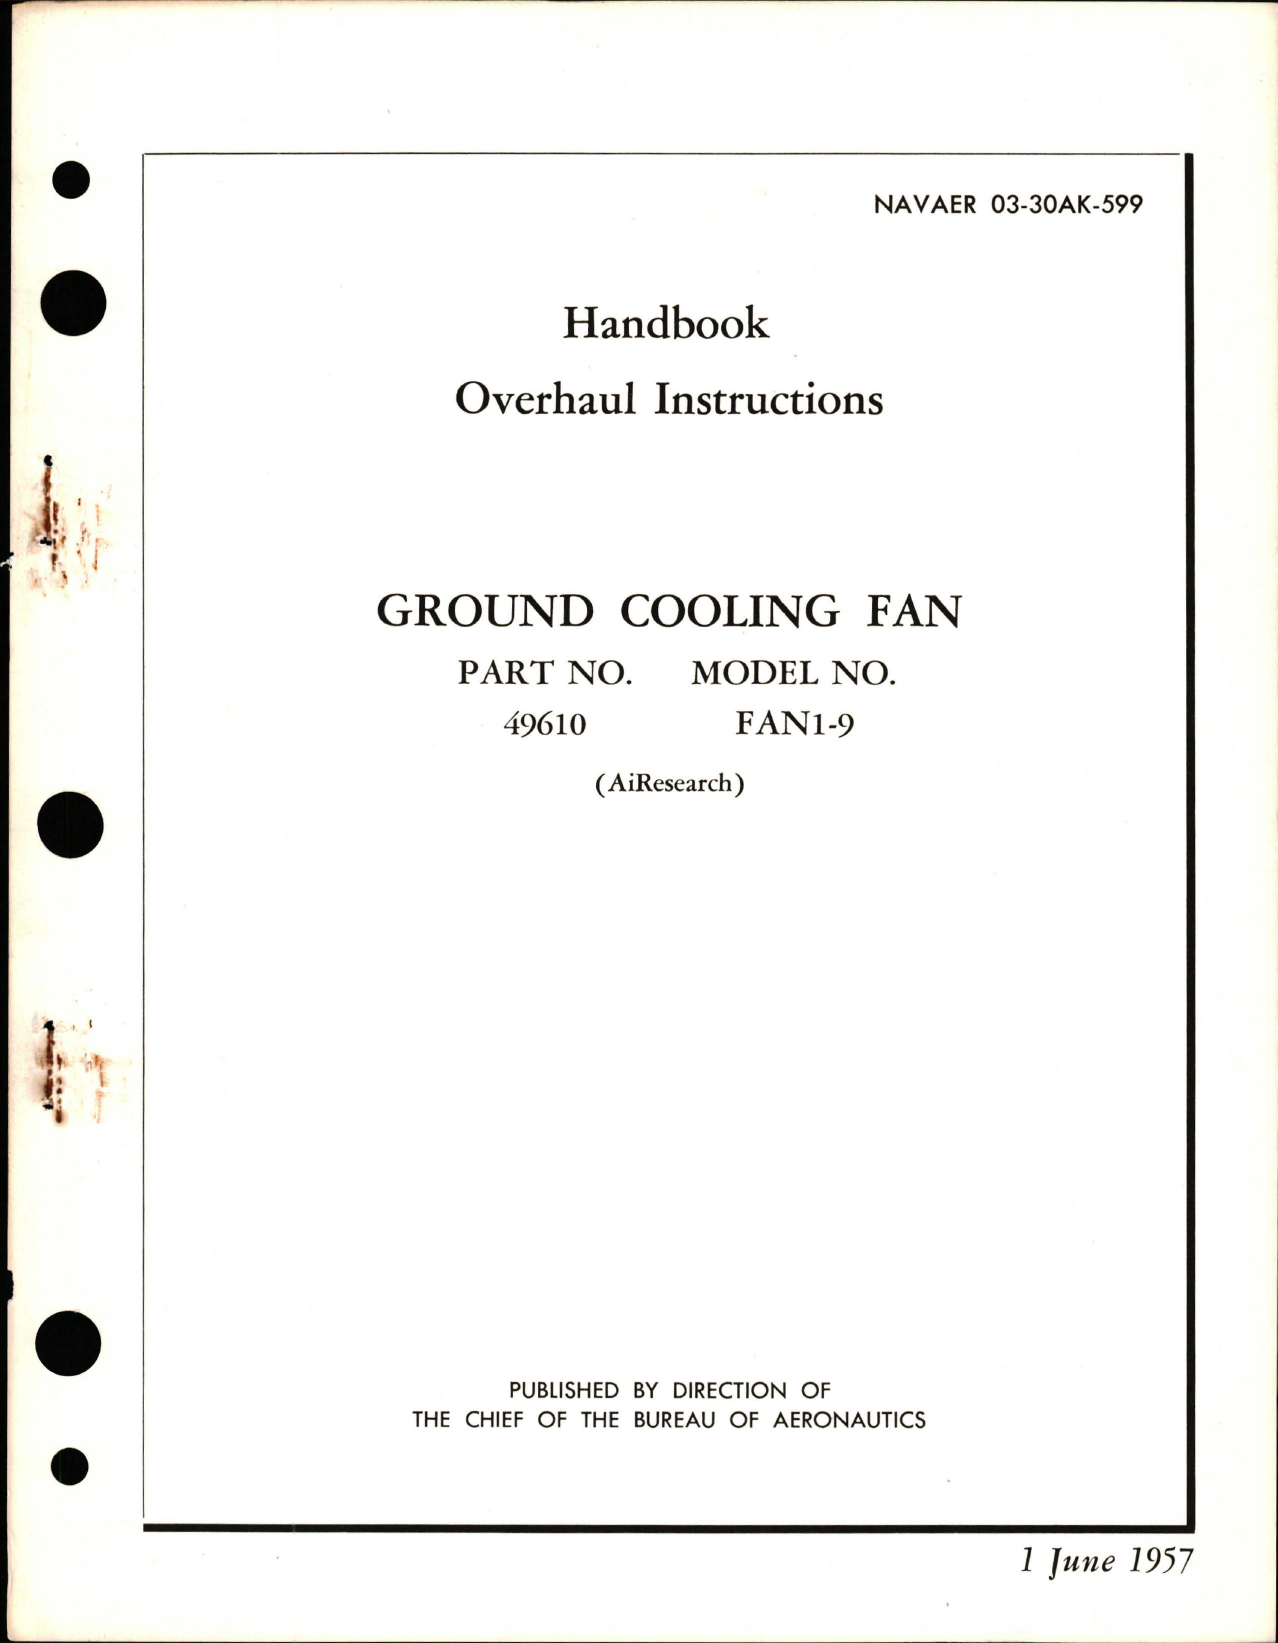 Sample page 1 from AirCorps Library document: Overhaul Instructions for Ground Cooling Fan - Part 49610 - Model FAN1-9